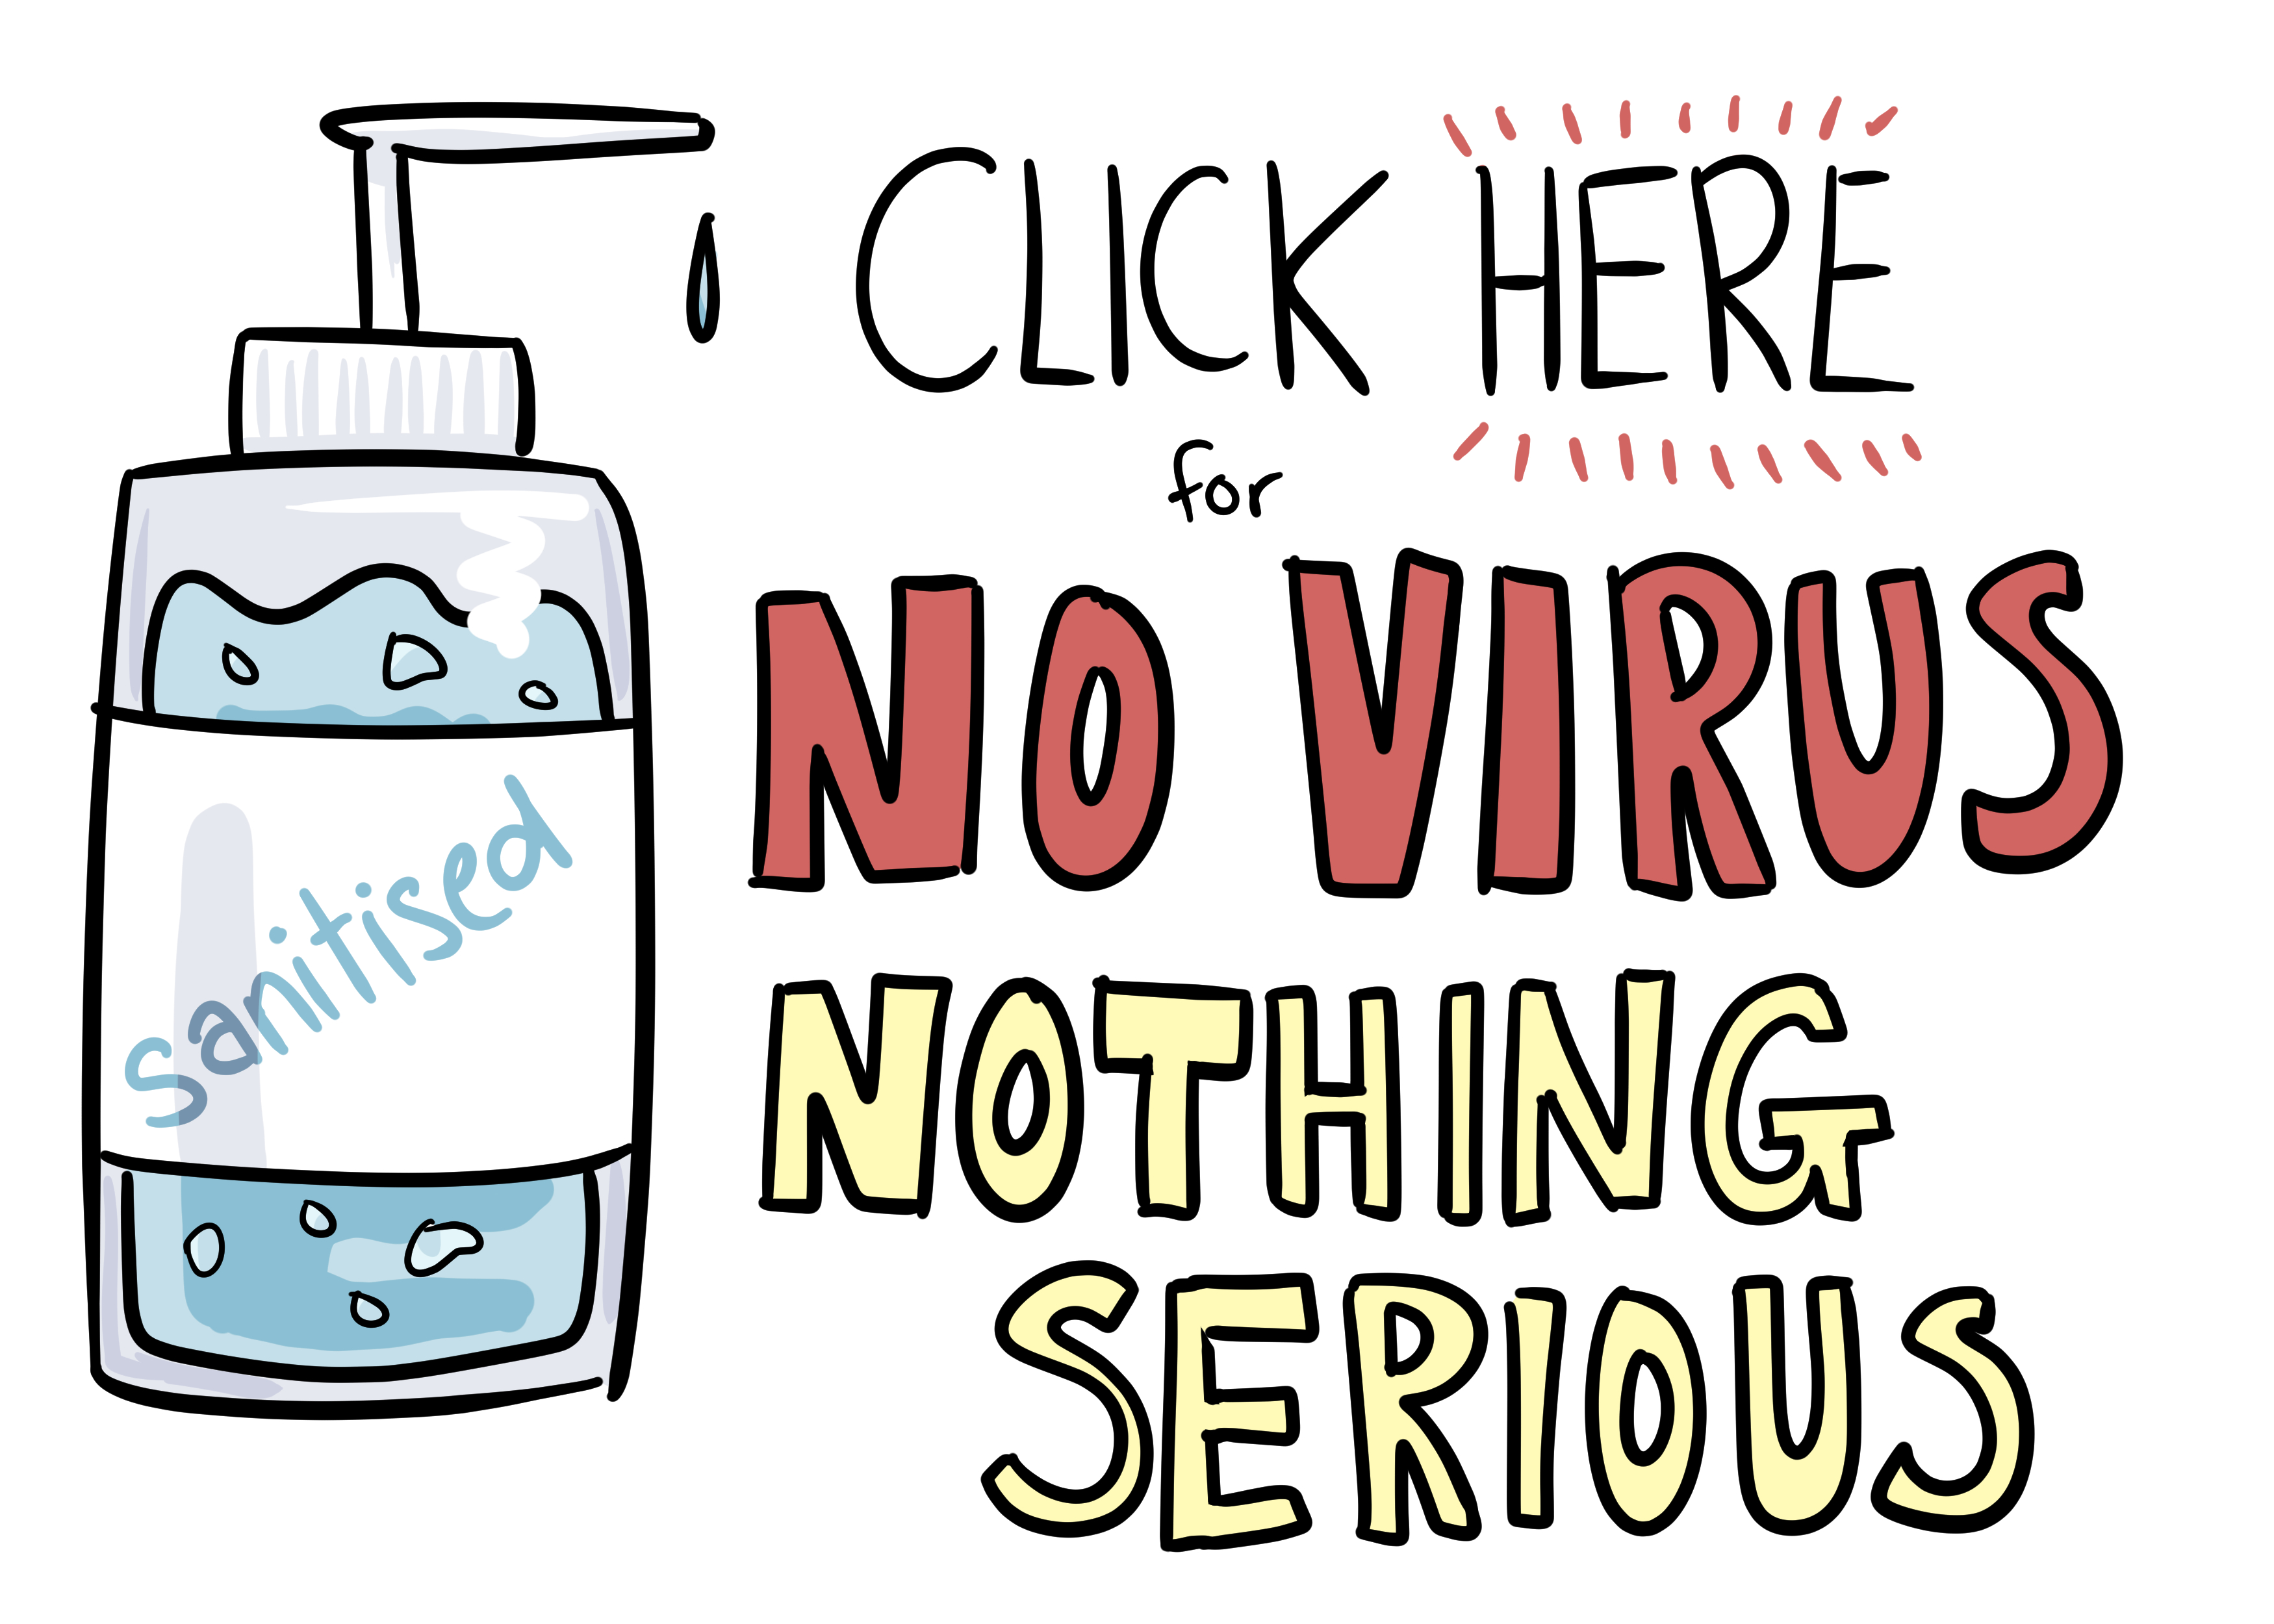 Click here for NO VIRUS NOTHING SERIOUS